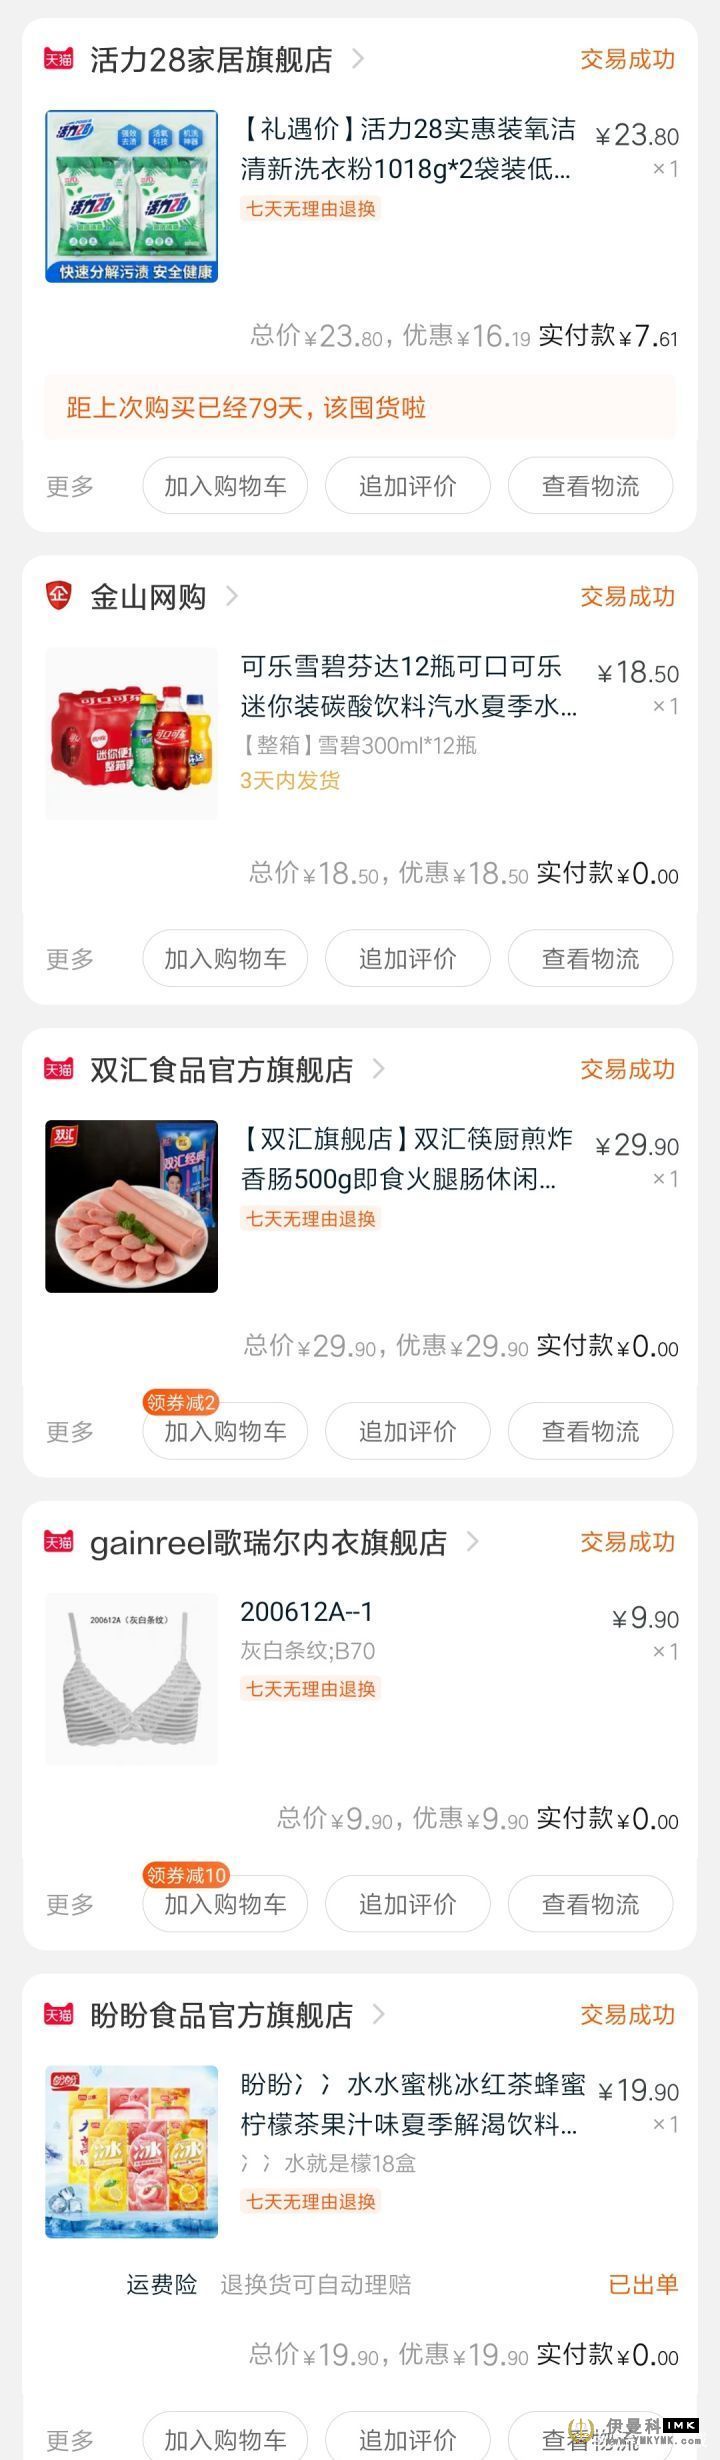 2020 Taobao Tmall Double 11 Activity gameplay guide (the most complete) with 1111 yuan red envelope guide news 图4张